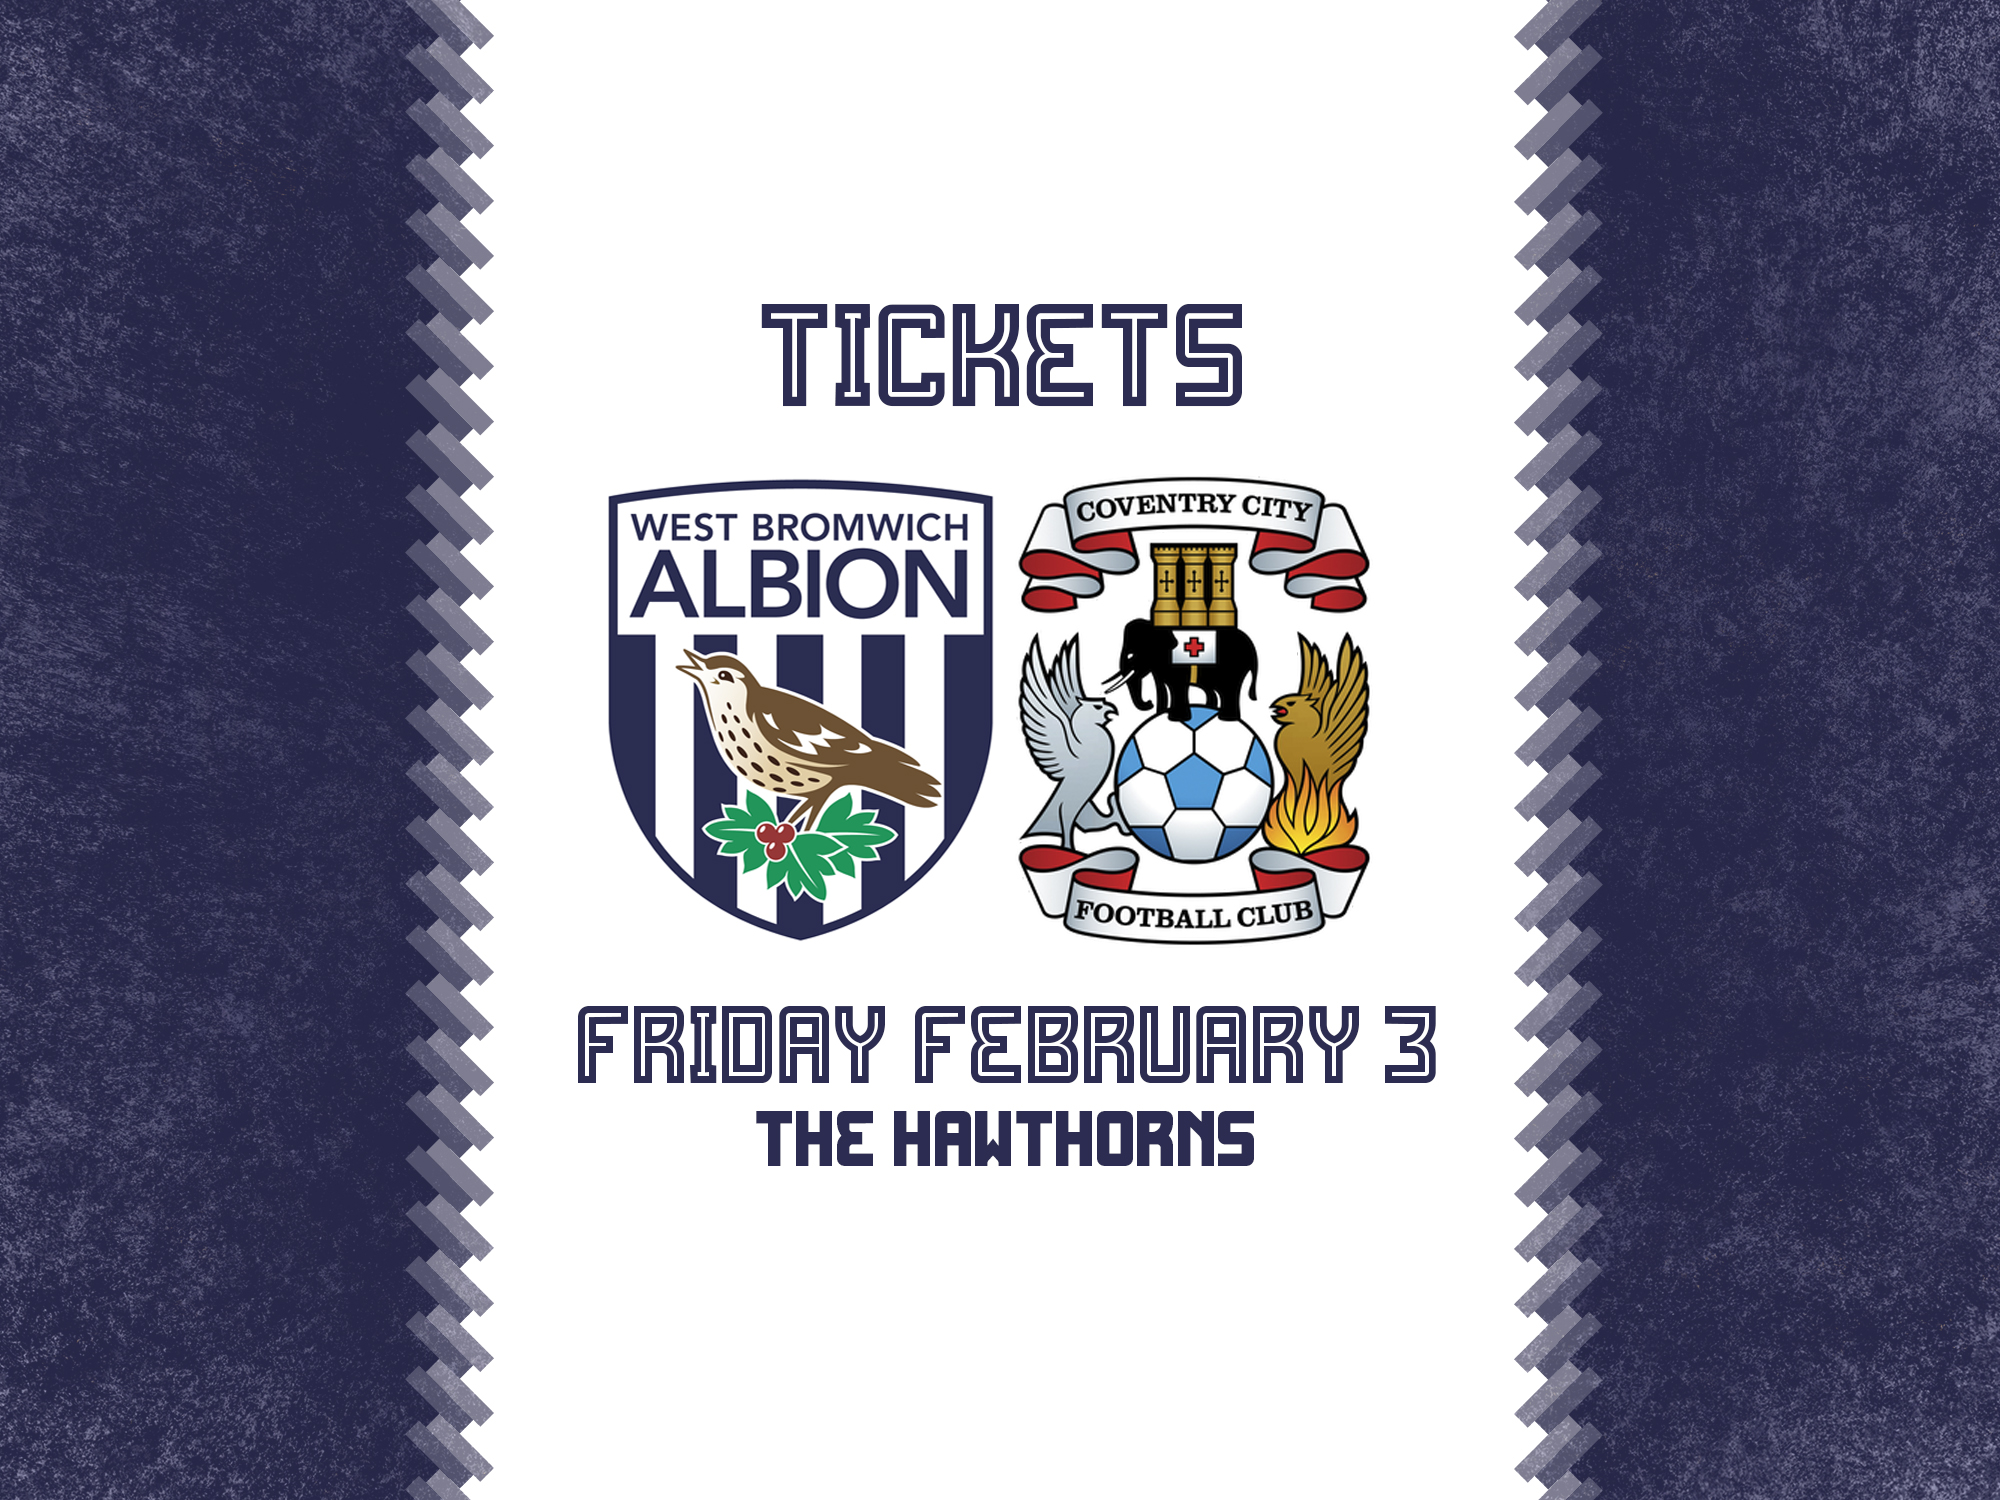 A ticket graphic displaying the information for Albion's game against Coventry City